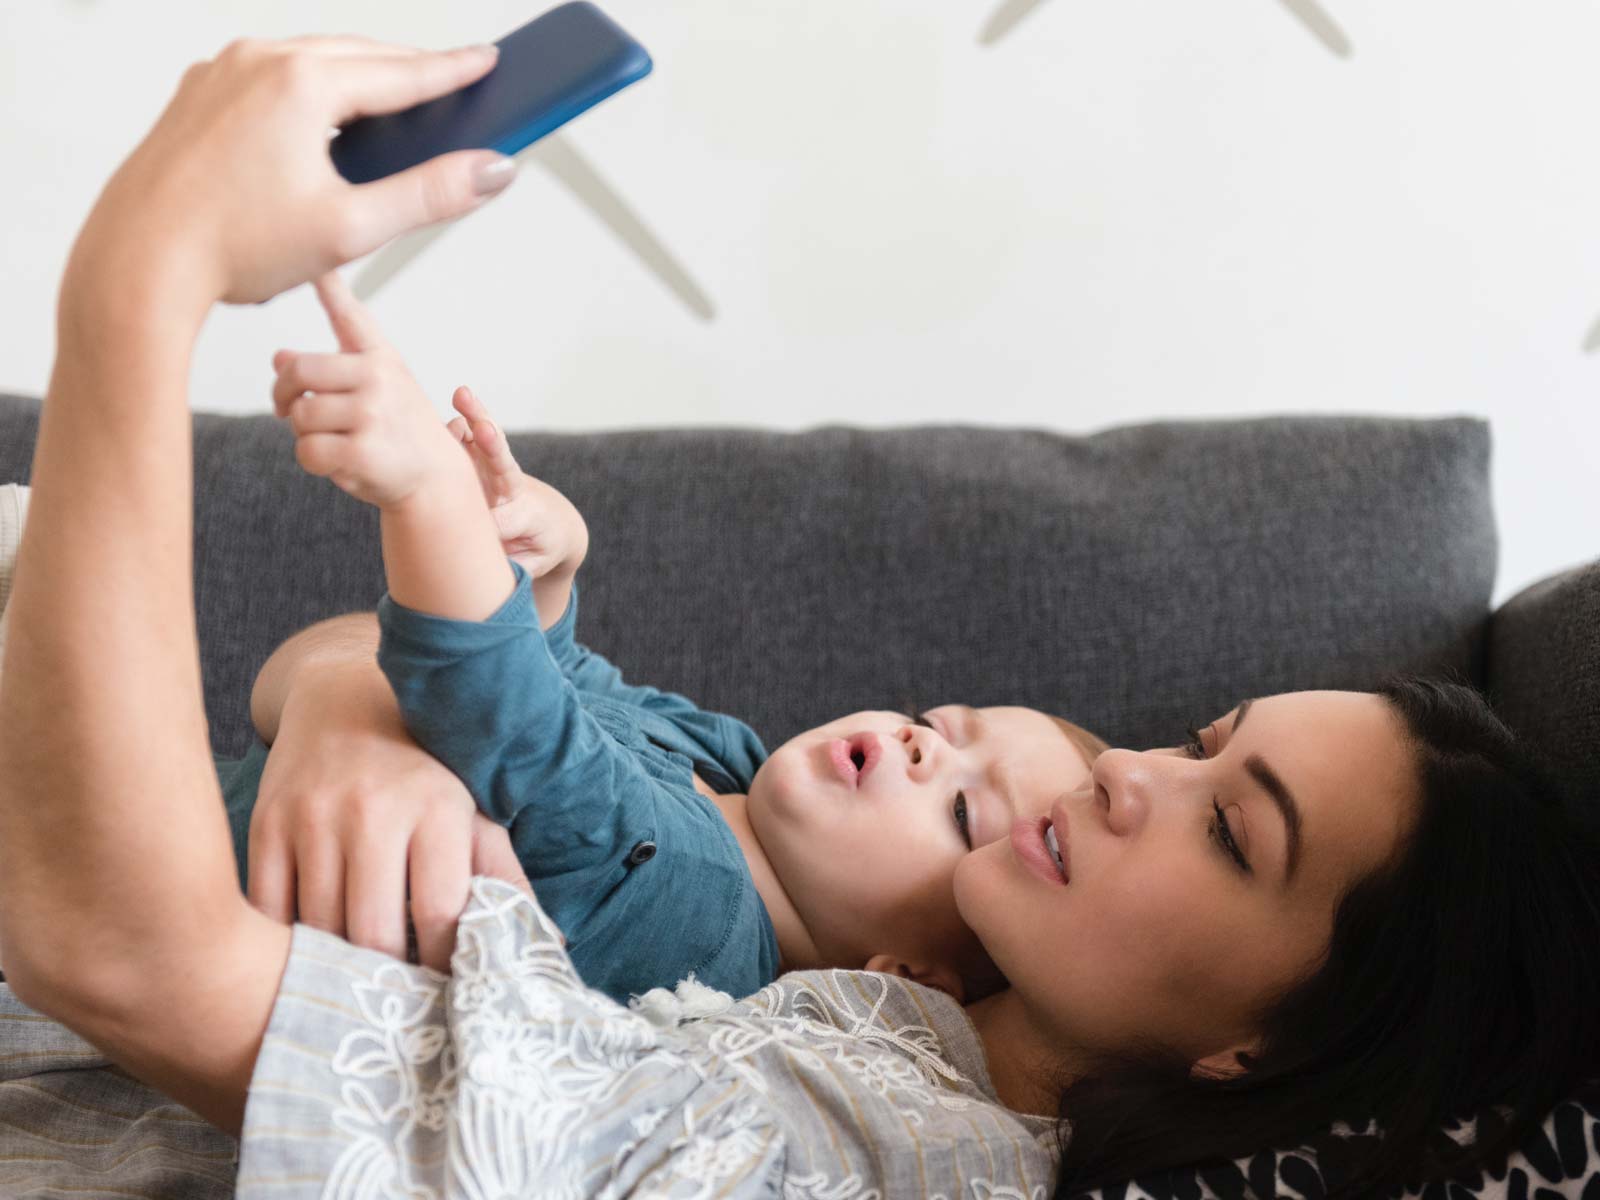 Mother and child cuddling and looking at phone